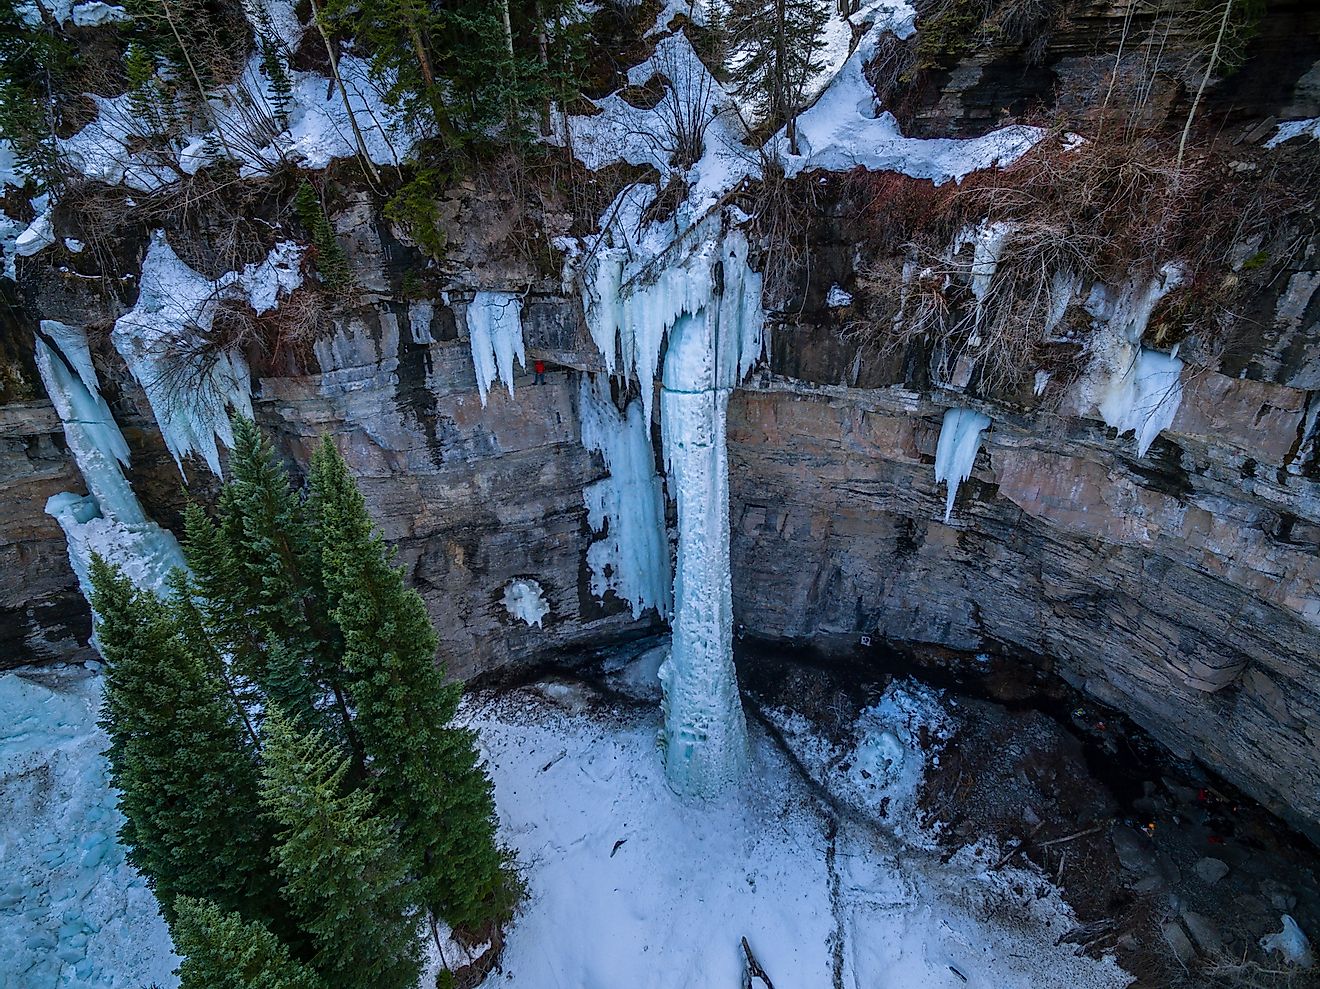 The frozen Fang Waterfall located in Vail, Colorado. Image credit: Nicholas Courtney/Shutterstock.com